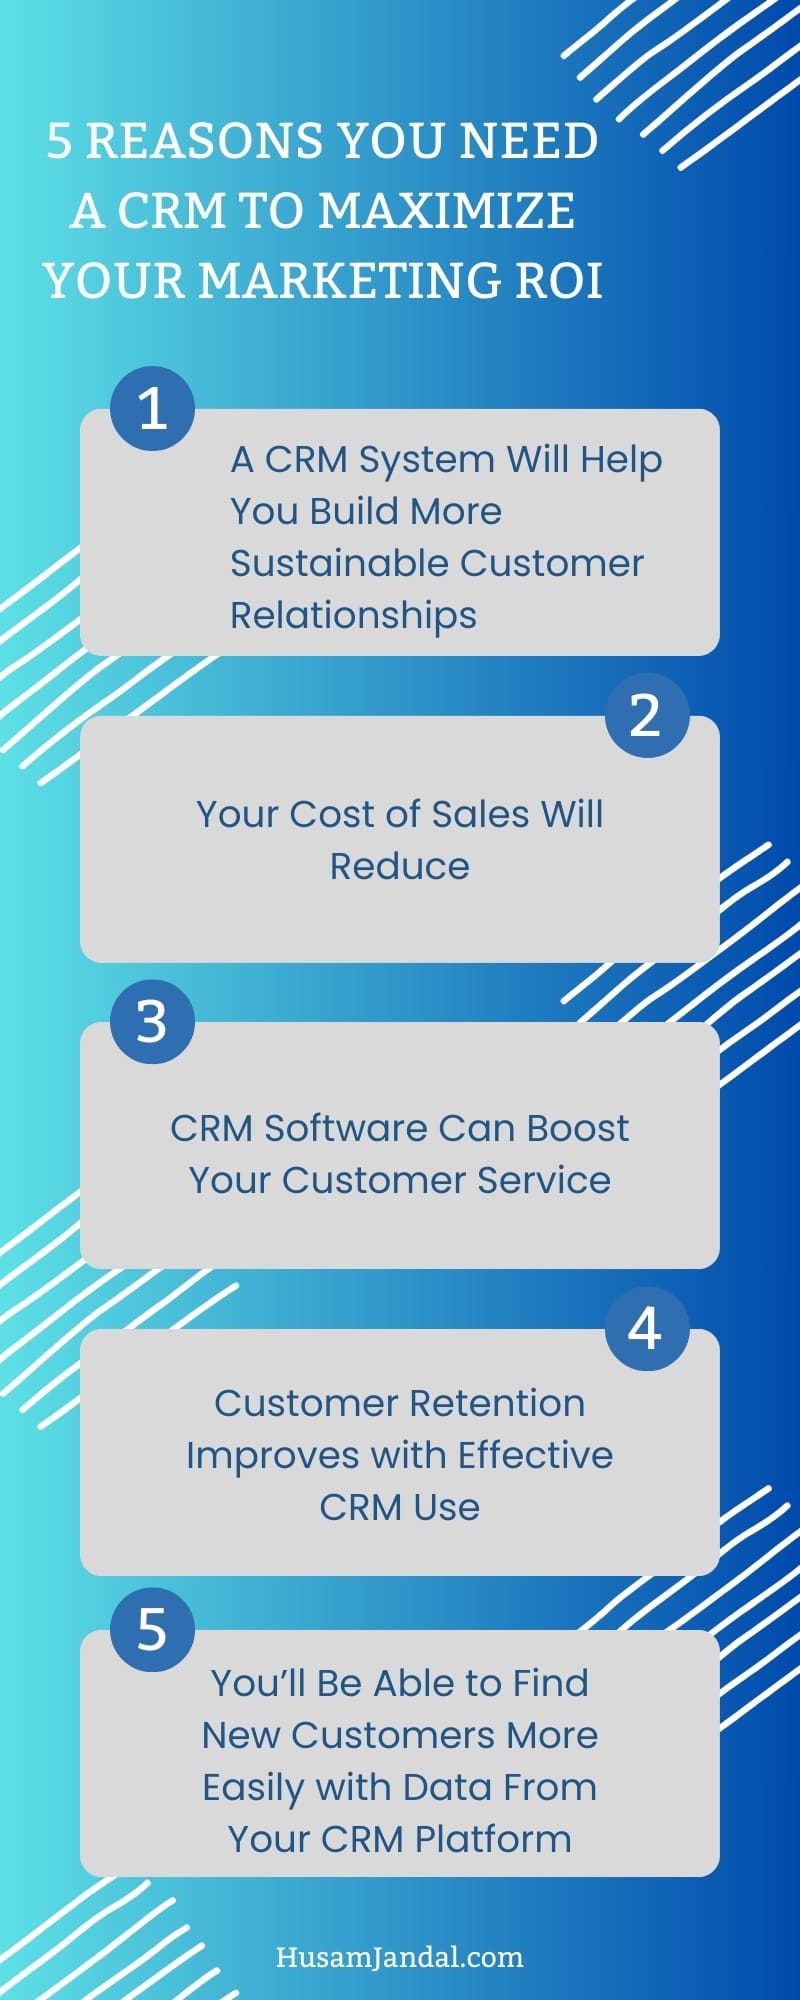 5 Reasons You Need a CRM to Maximize Your Marketing ROI_Infographic